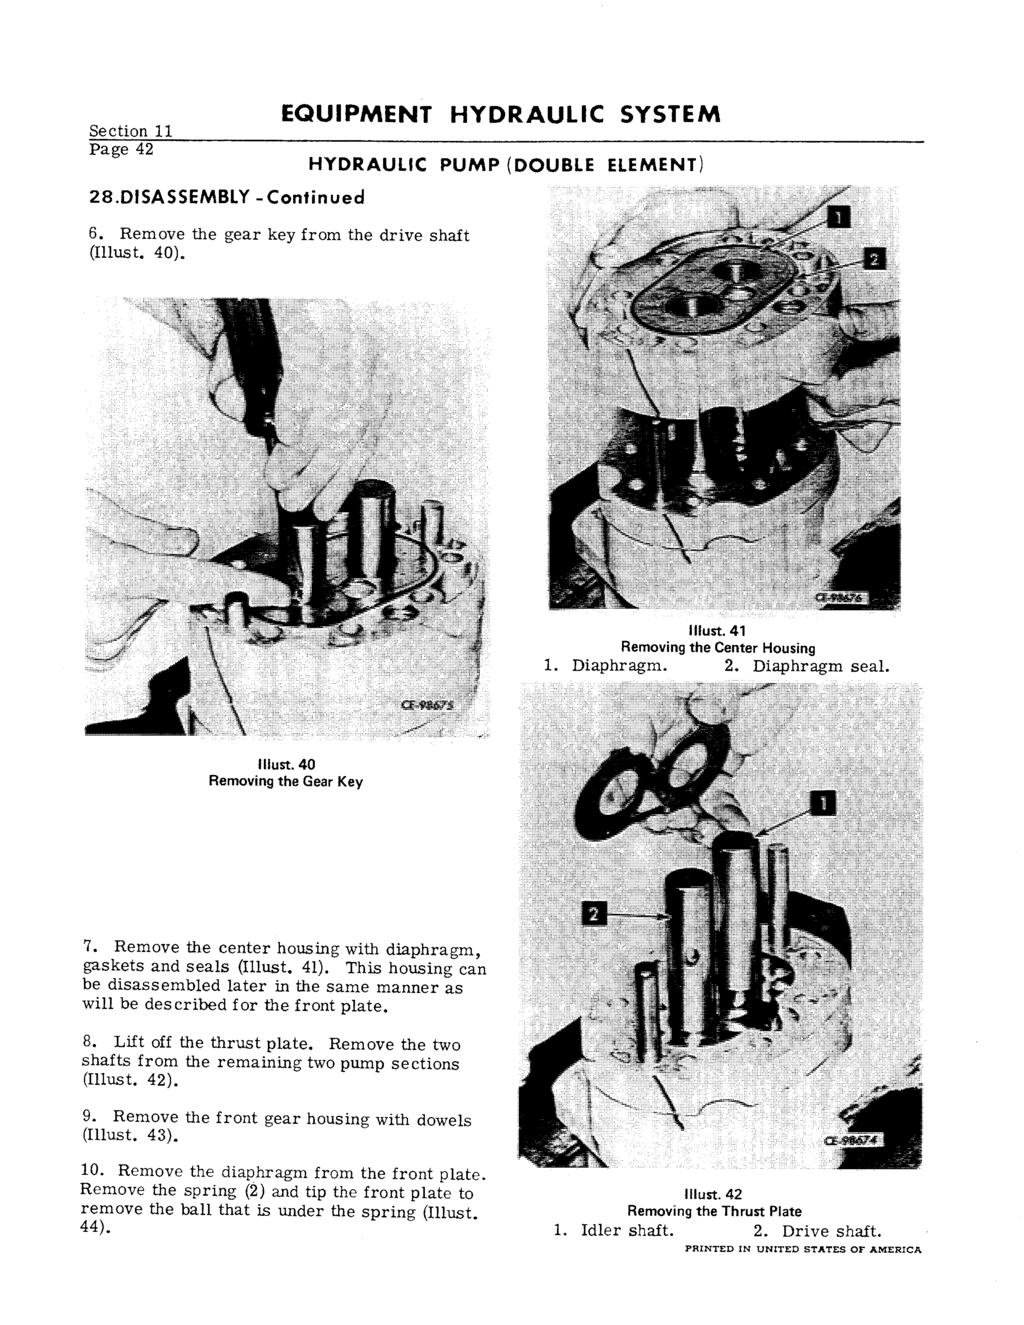 Section 11 42 28.DISASSEMBLY -Continued EQUIPMENT HYDRAULIC SYSTEM 6. Remove the gear key from the drive shaft (Illust. 40). HYDRAULIC PUMP (DOUBLE ELEMENT) liiust.41 Removing the Center Housing 1.